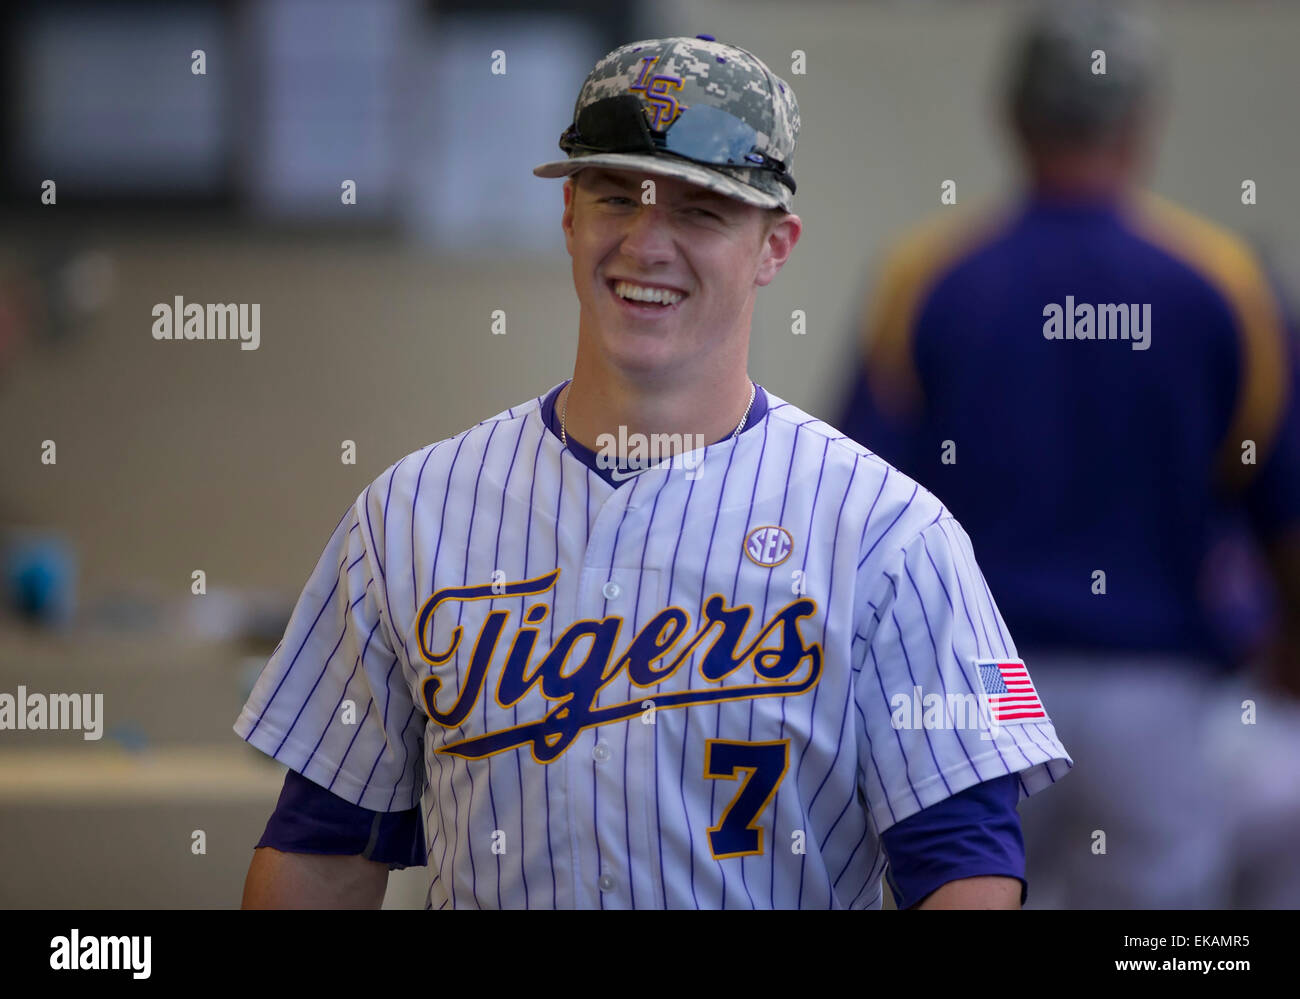 Rouge, LA, USA. 7th Apr, 2015. LSU infielder (7) during the game between LSU and New Orleans at Alex Box Stadium in Baton Rouge, LA. LSU defeats New 11-2 ©